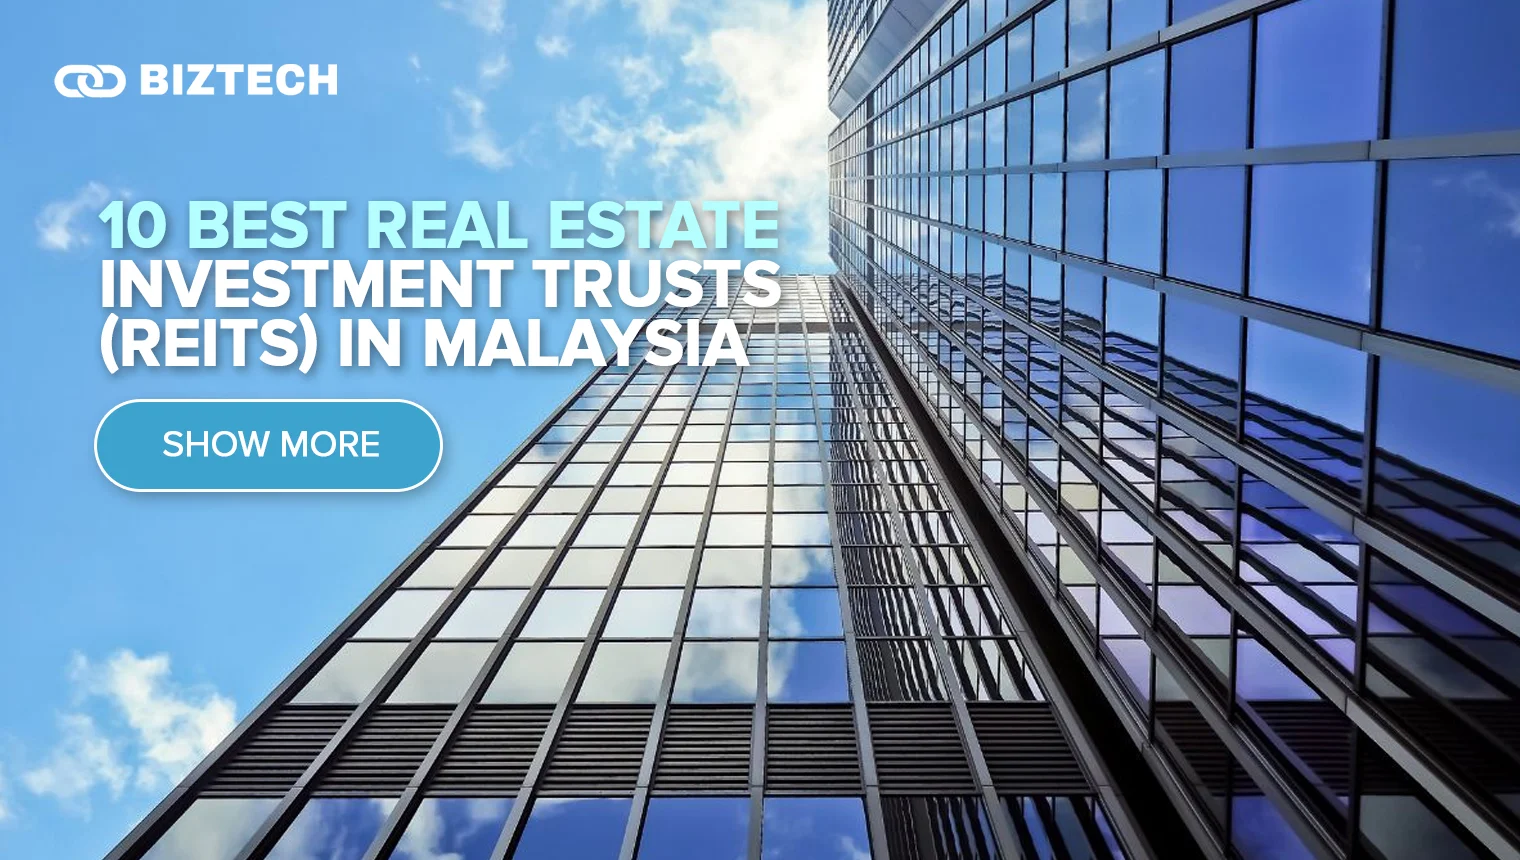 10 Best Real Estate Investment Trusts (REITs) in Malaysia